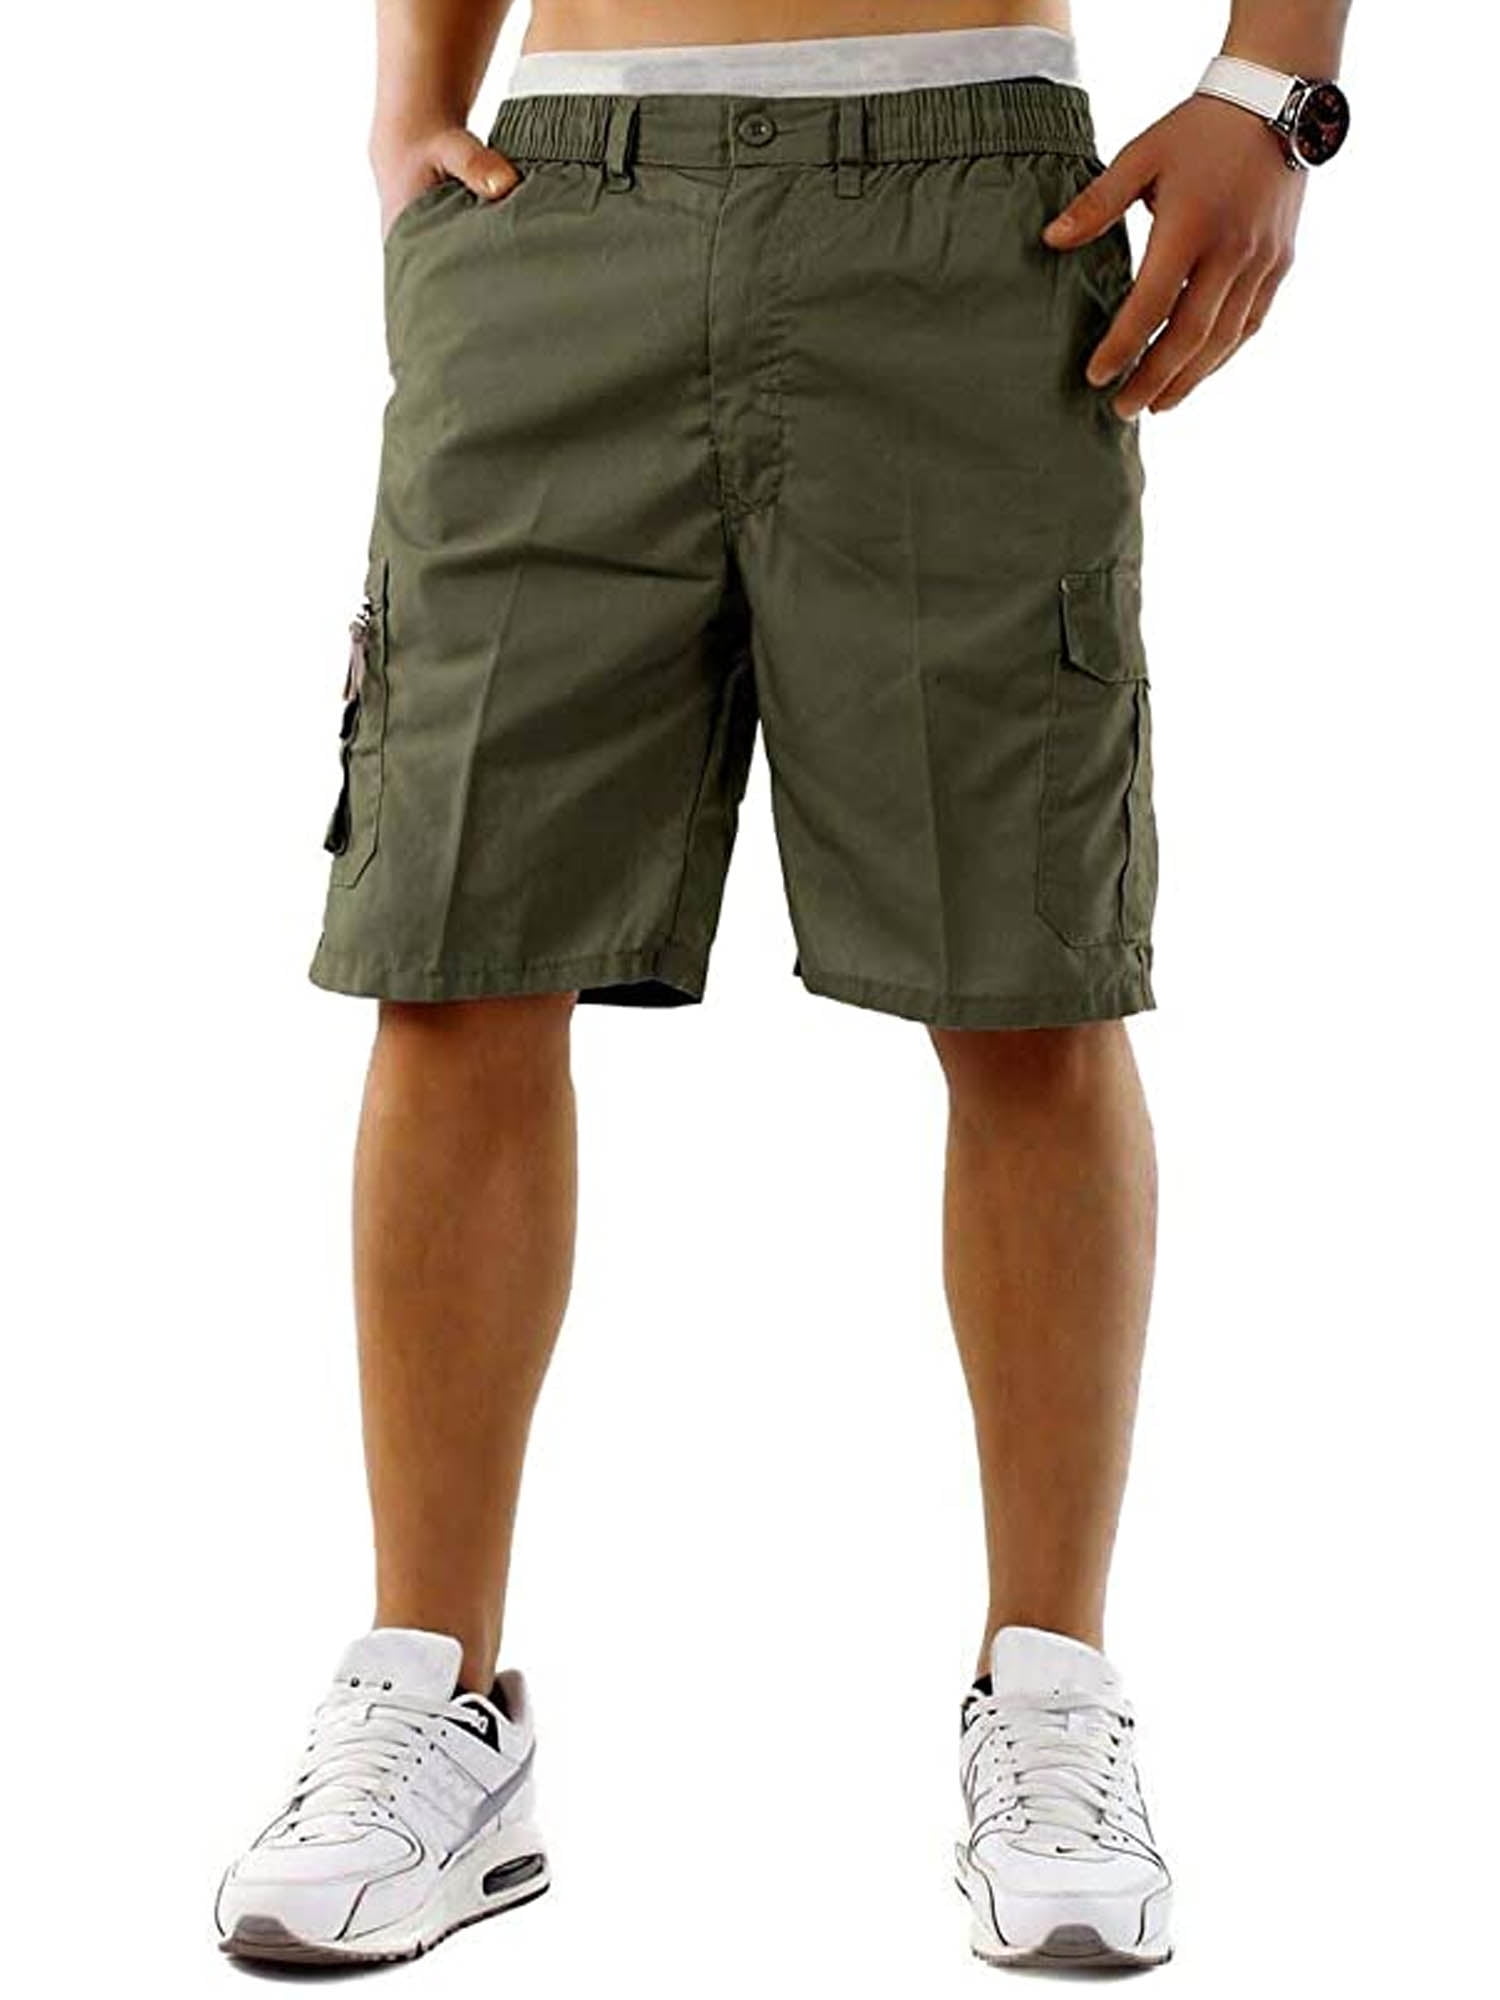 Liangchengmei Mens Cargo Shorts Relaxed Fit Multi-Pocket Outdoor Summer ...